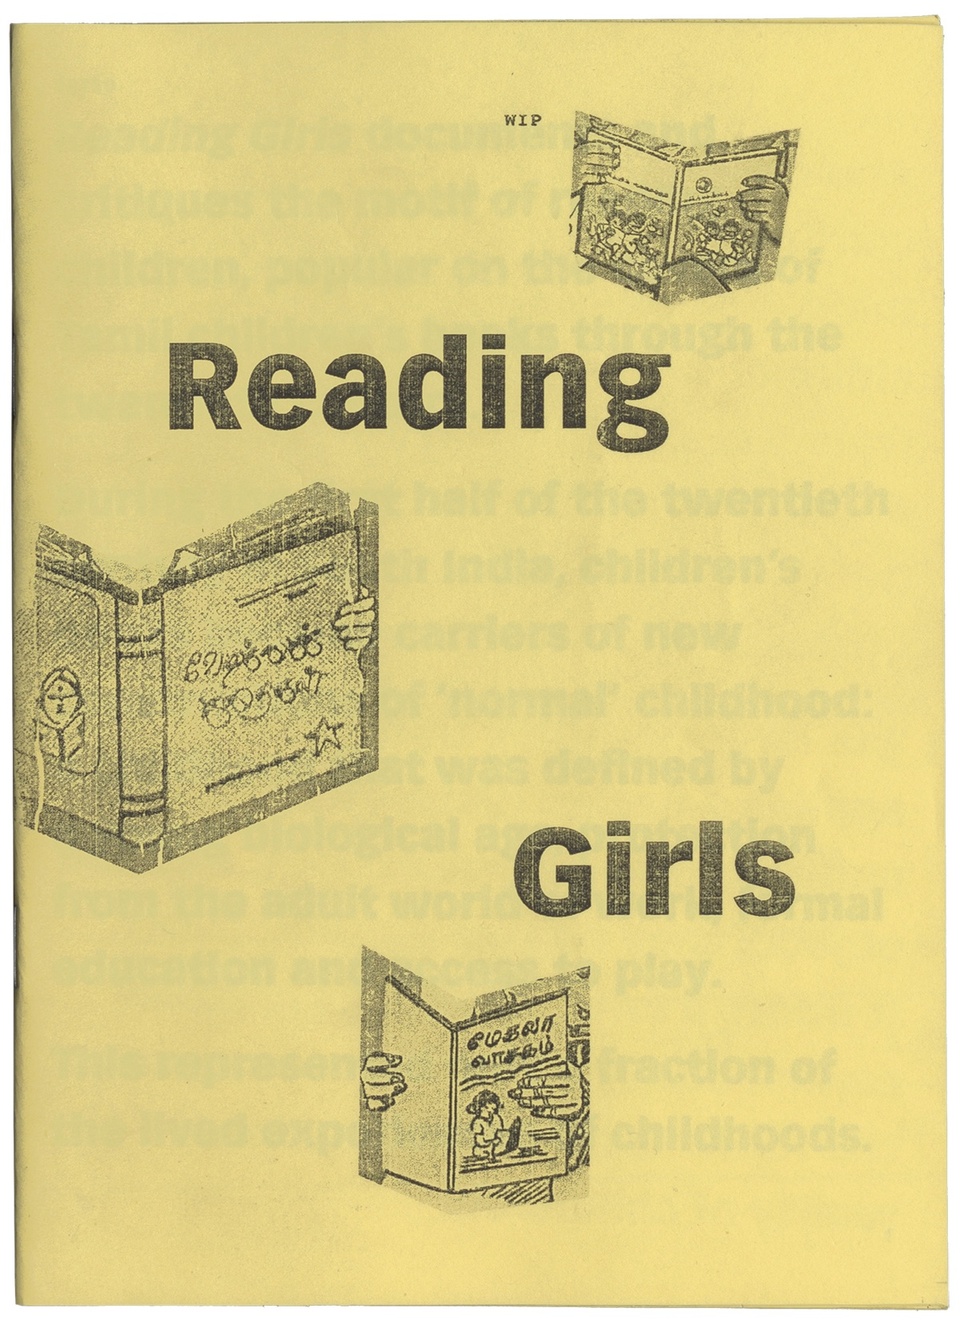 Cover of zine by Nia Thandapani with text Reading Girls